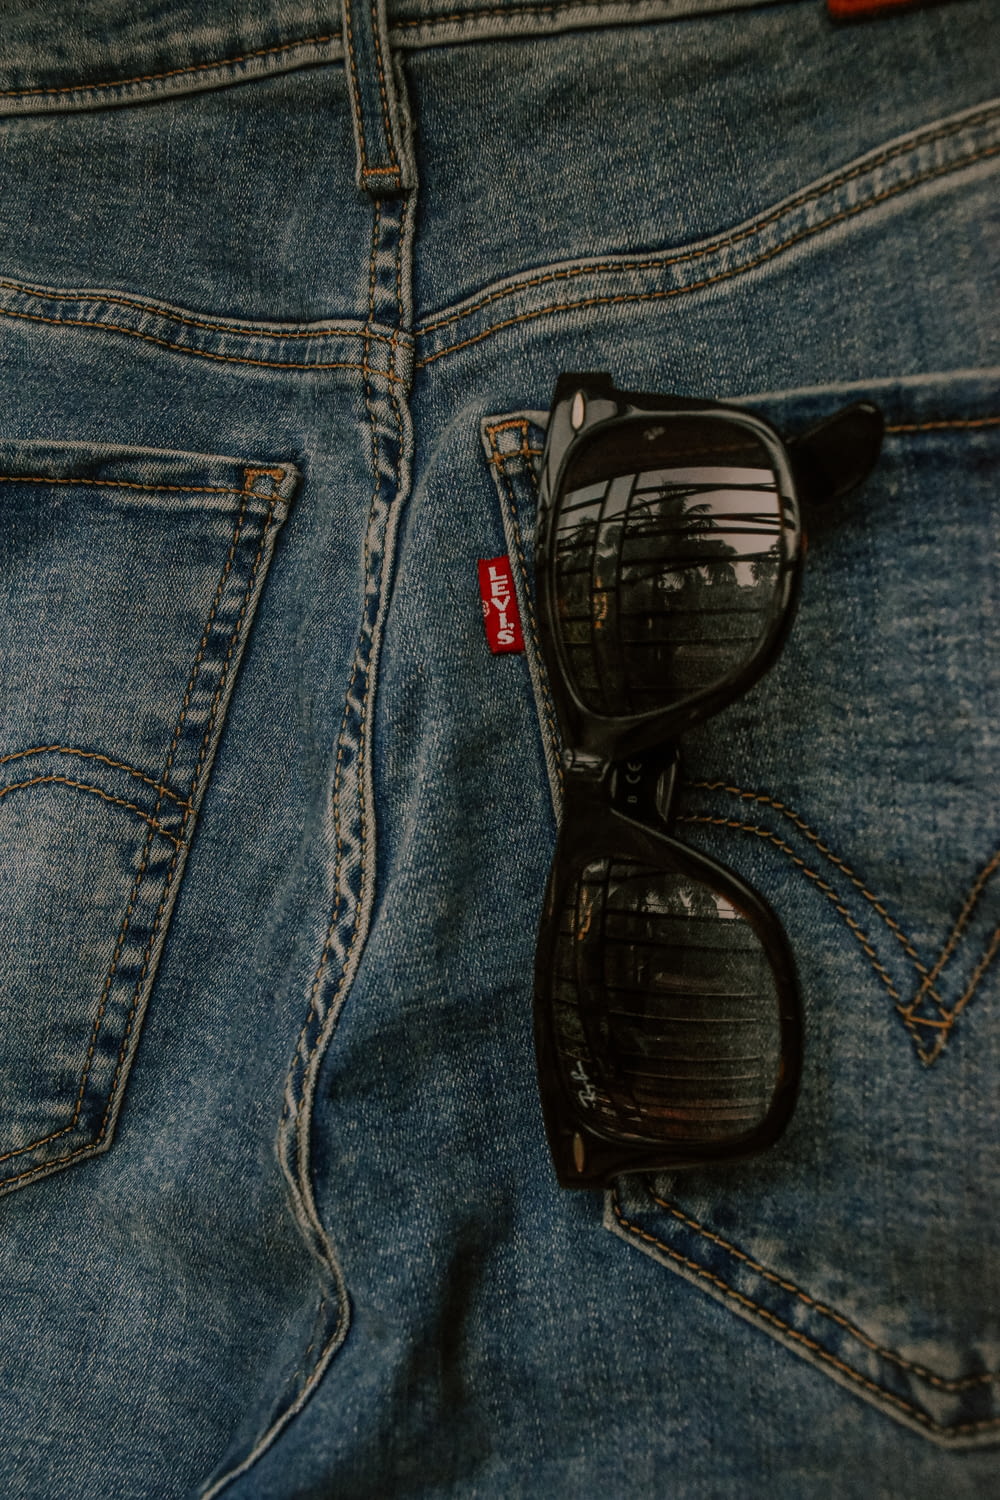 a pair of sunglasses sitting on the back of a pair of jeans